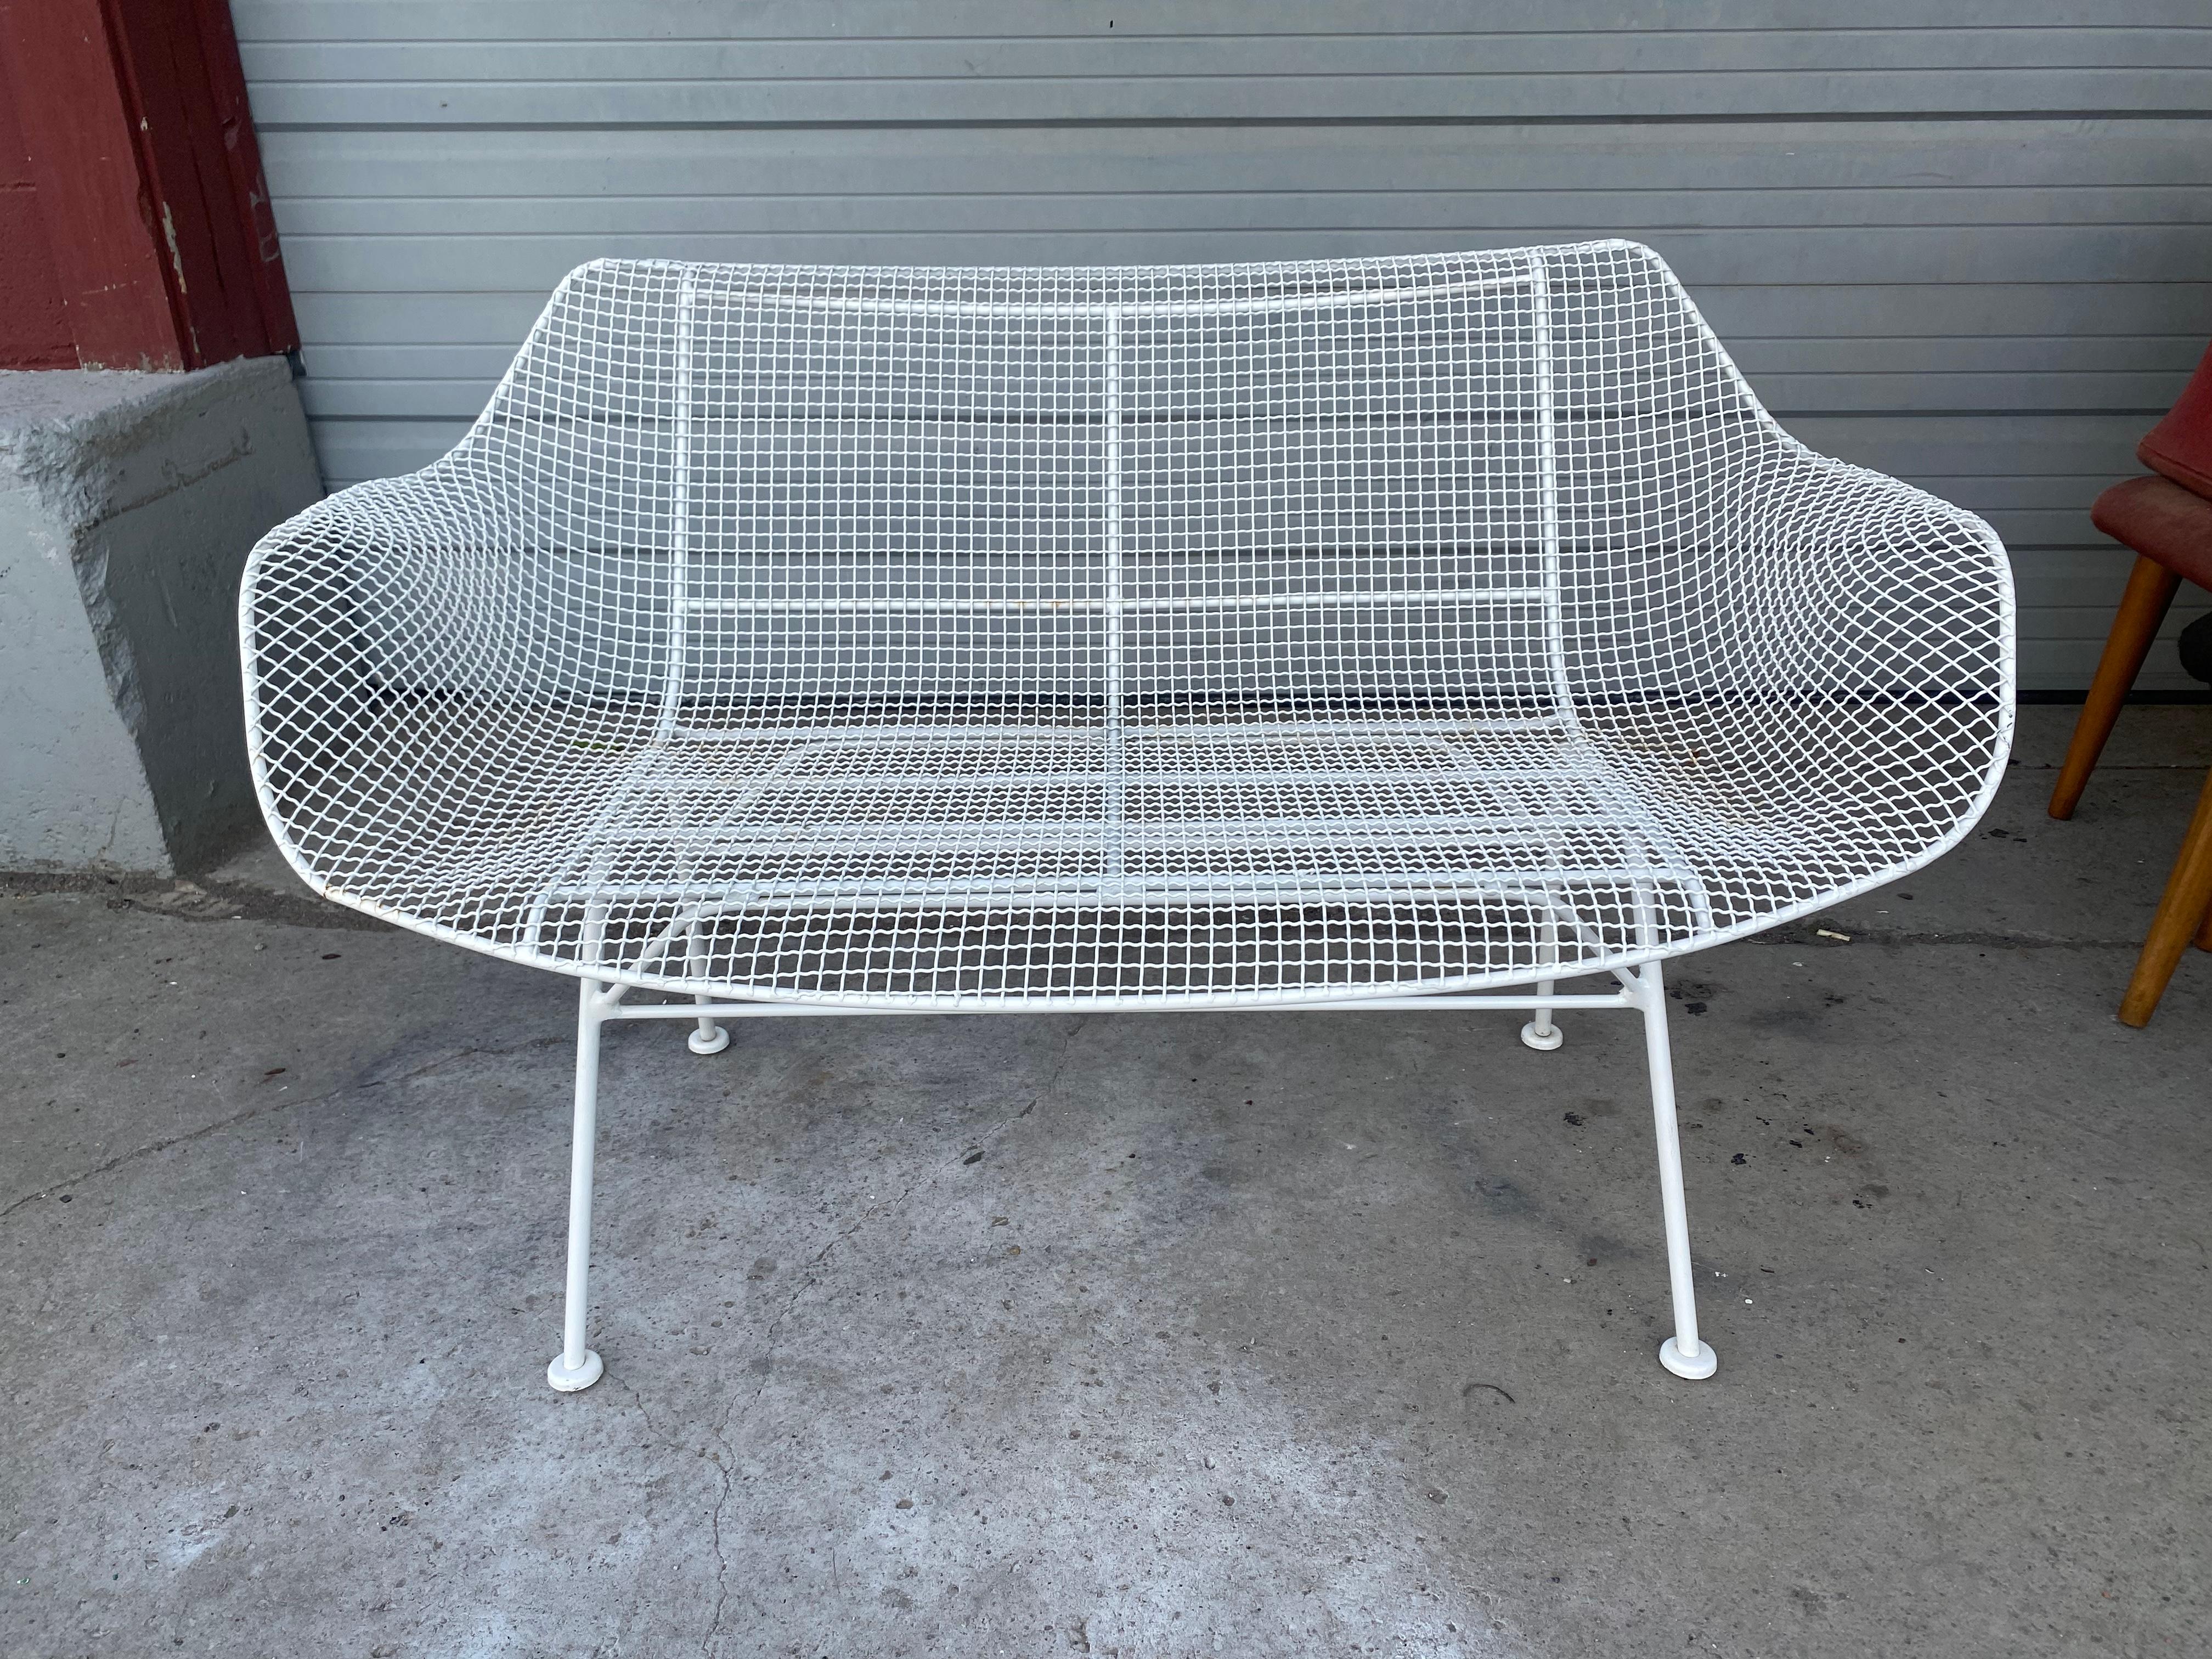 Offered here is a seldom seen, vintage outdoor bench / settee by Russell Woodard Sculpture It has a wrought iron frame with a low-slung woven mesh steel seat made to withstand all weather conditions. Screams Modernist Design ! Perfect for outdoor